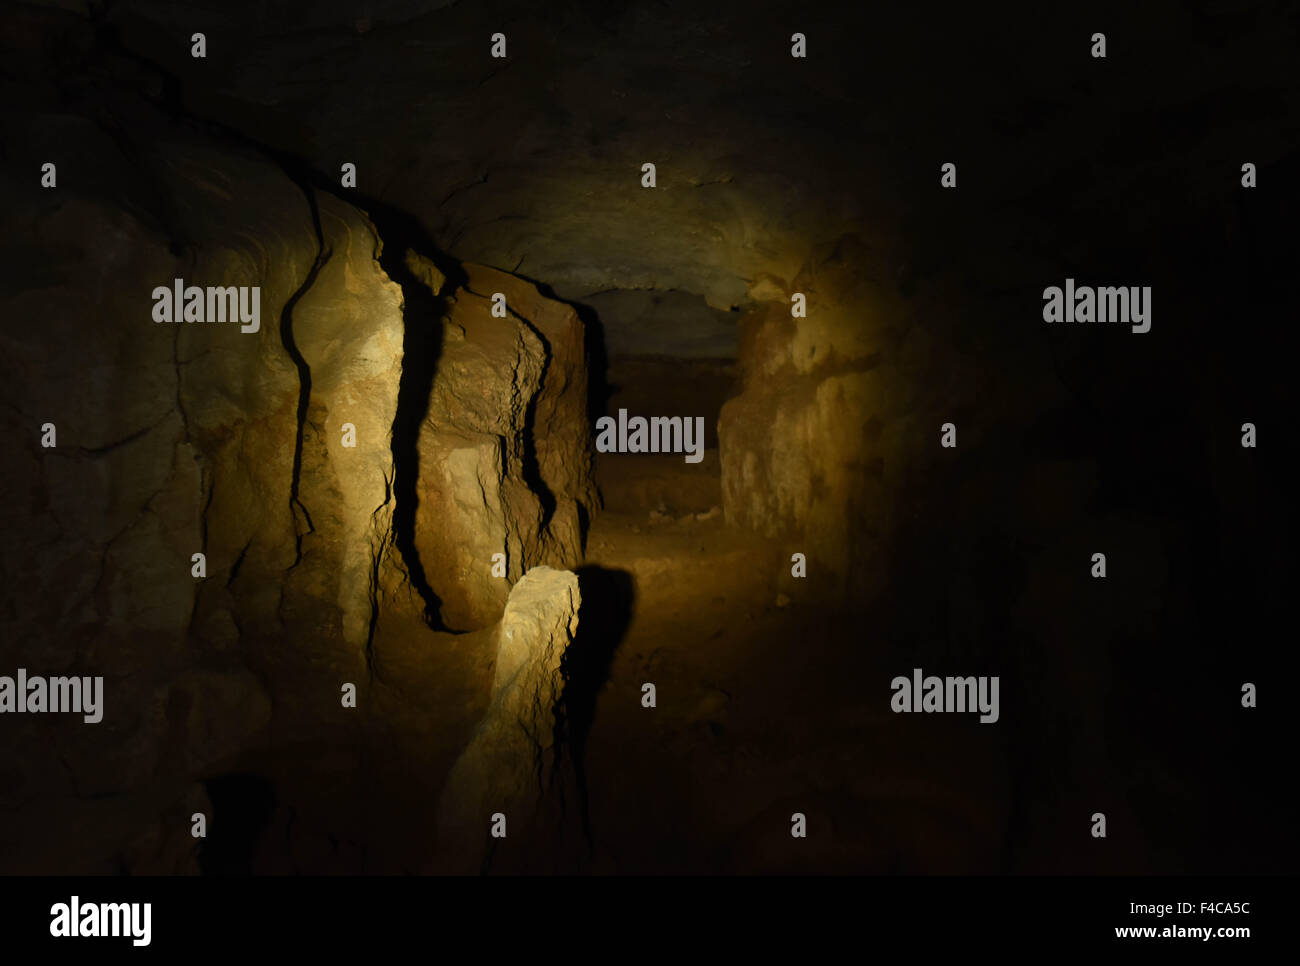 (151016) -- DAOXIAN, Oct. 16, 2015 (Xinhua) -- Photo taken on Oct. 16, 2015 shows the cave in which some tooth fossils were found at Daoxian County in central China's Hunan Province. Tooth fossils found in Daoxian indicate the early form of modern homo sapiens appeared in the region more than 80,000 years ago. The 47 fossils date back from 80,000 to 120,000 years and are believed to be the oldest remains of a completely modern form scientists have known in the east Asia region, the study's leading scientists said on Oct. 15, 2015.  (Xinhua/Li Ga) (yxb) Stock Photo